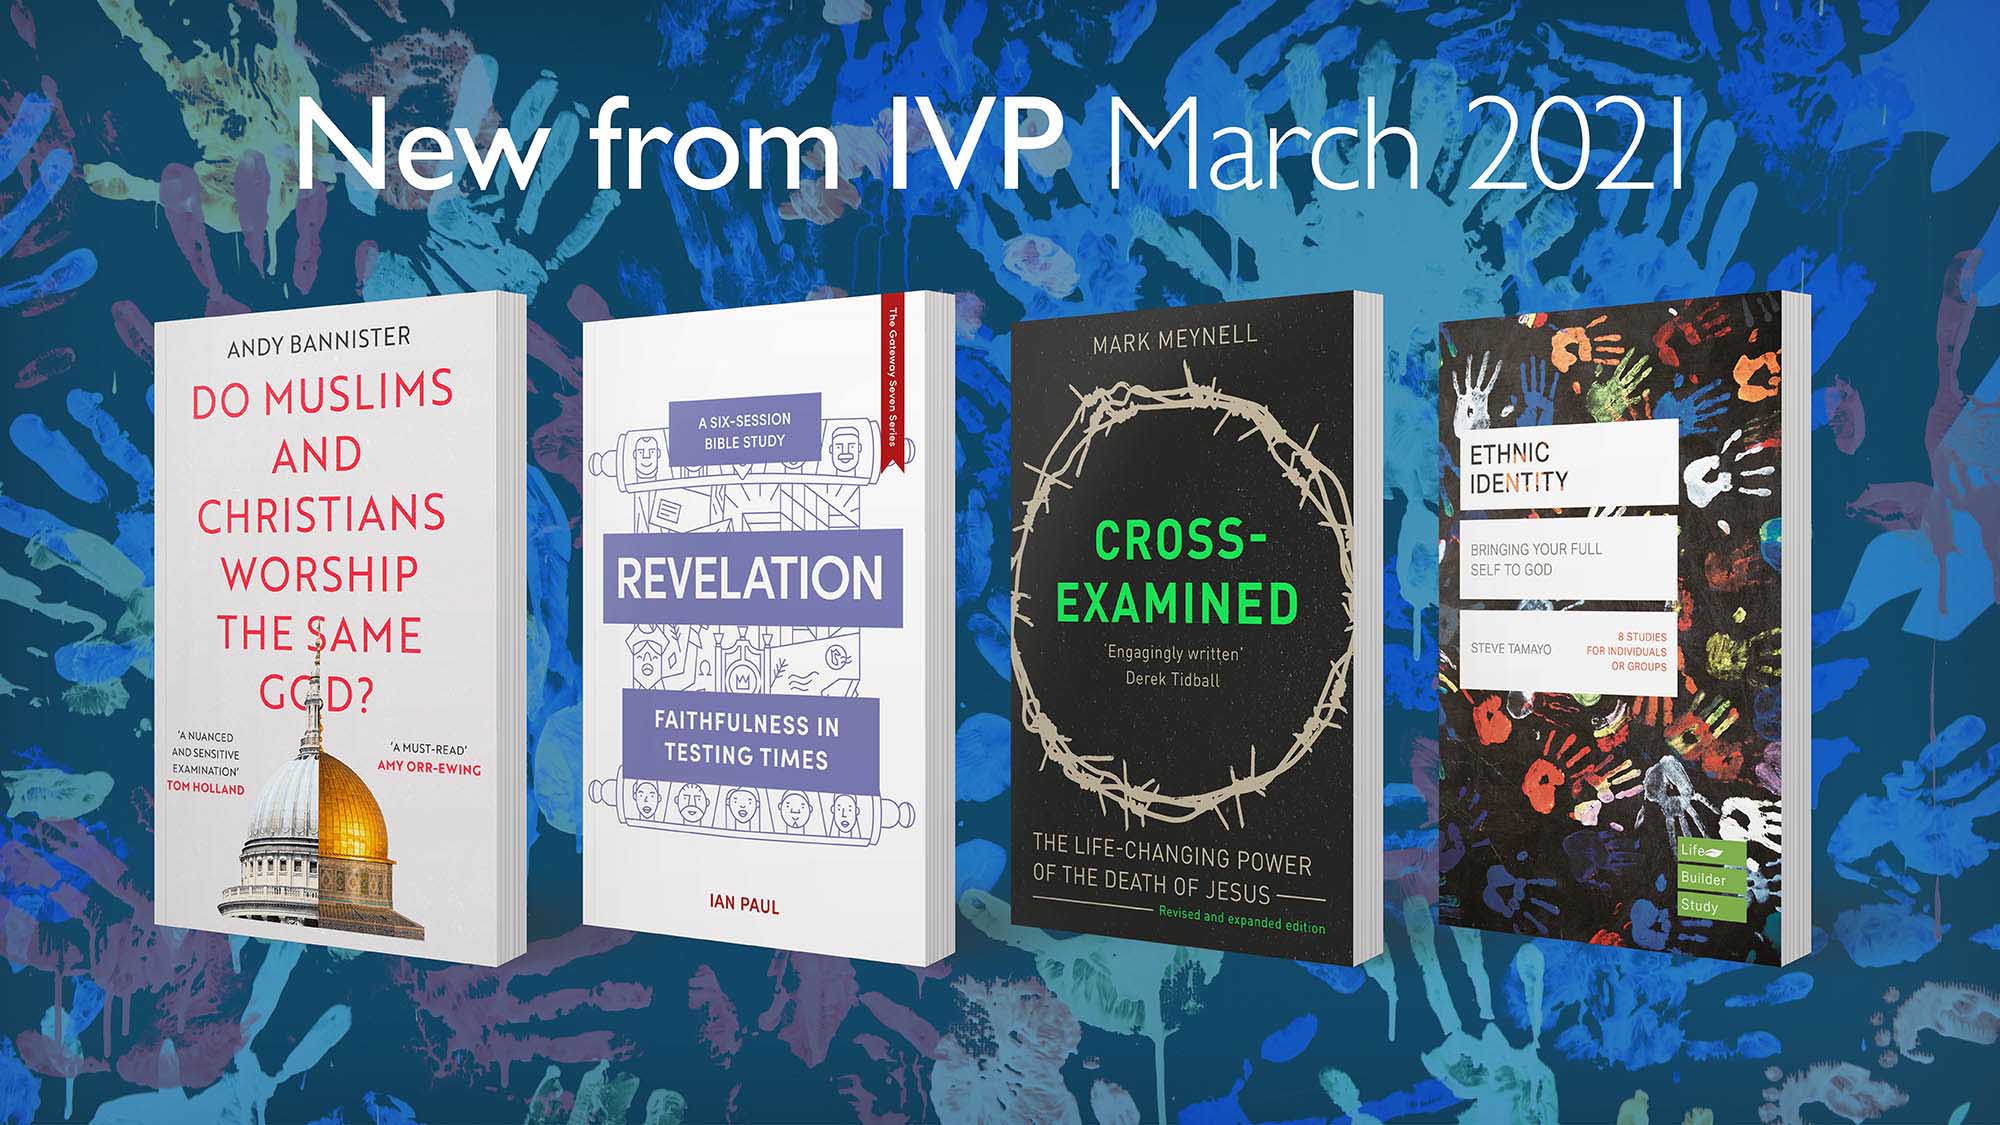 The IVP March 2021 Releases